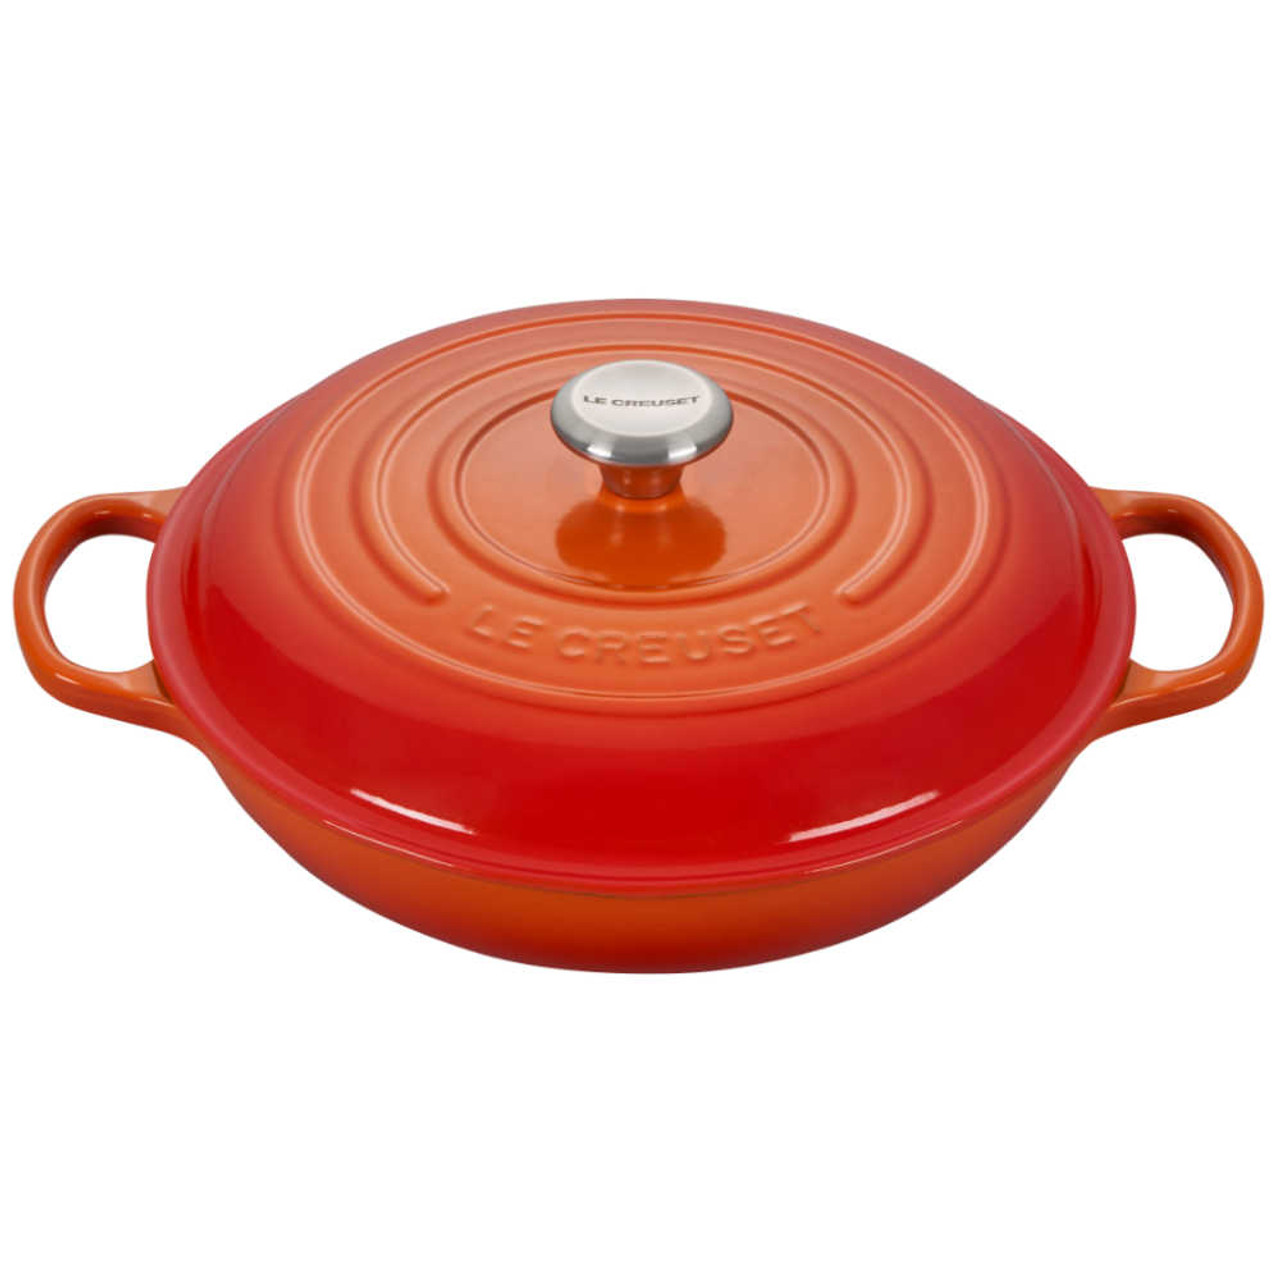 https://cdn11.bigcommerce.com/s-hccytny0od/images/stencil/1280x1280/products/3546/13524/le-creuset-braiser-flame-3qt_1__75537.1614658172.jpg?c=2?imbypass=on